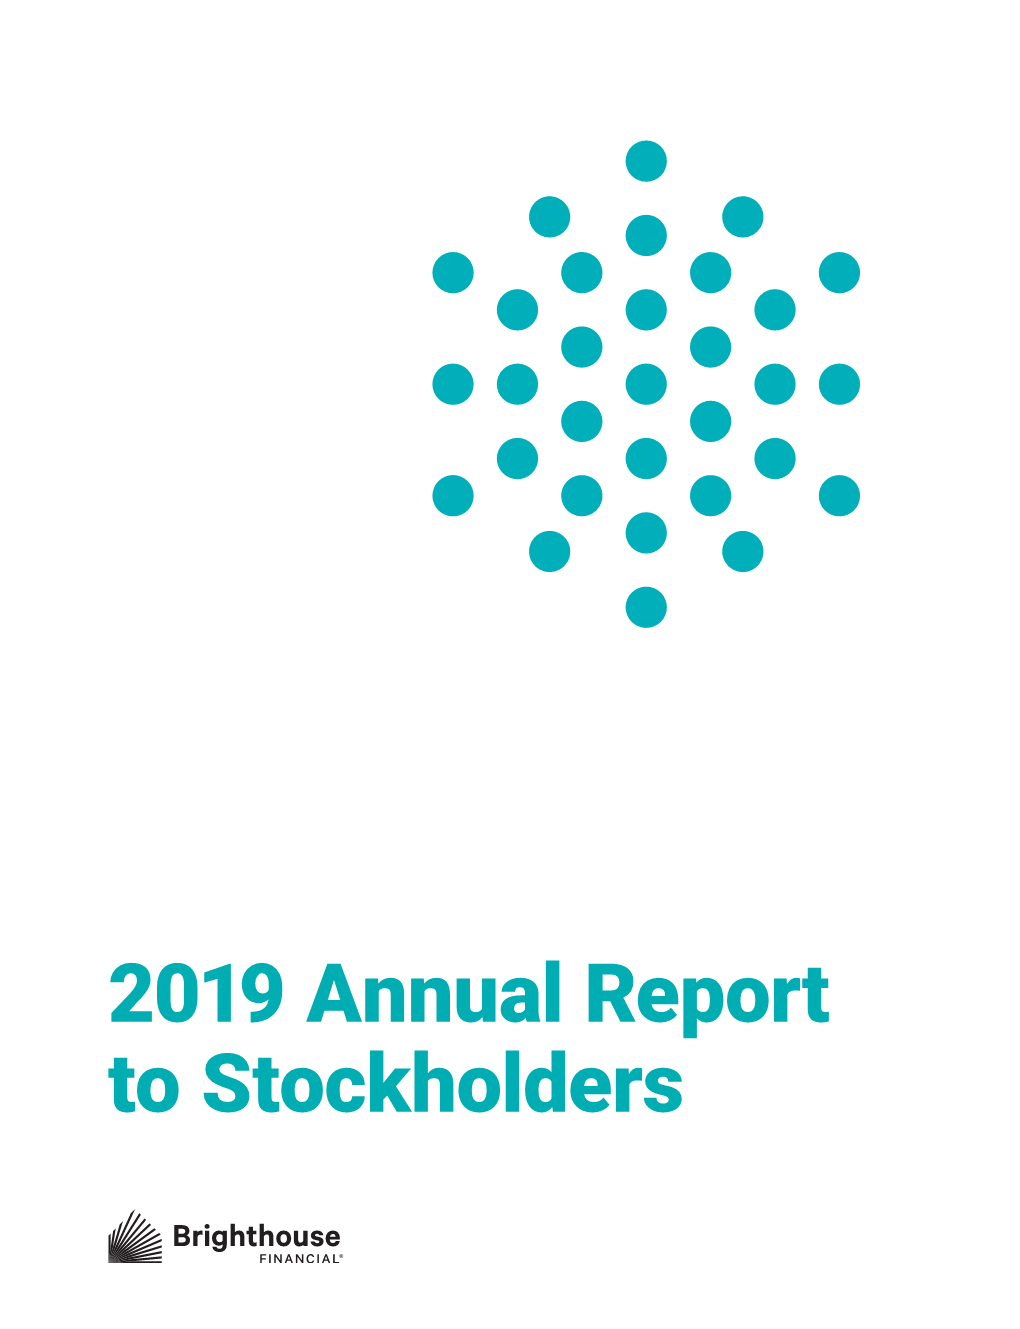 2019 Annual Report to Stockholders